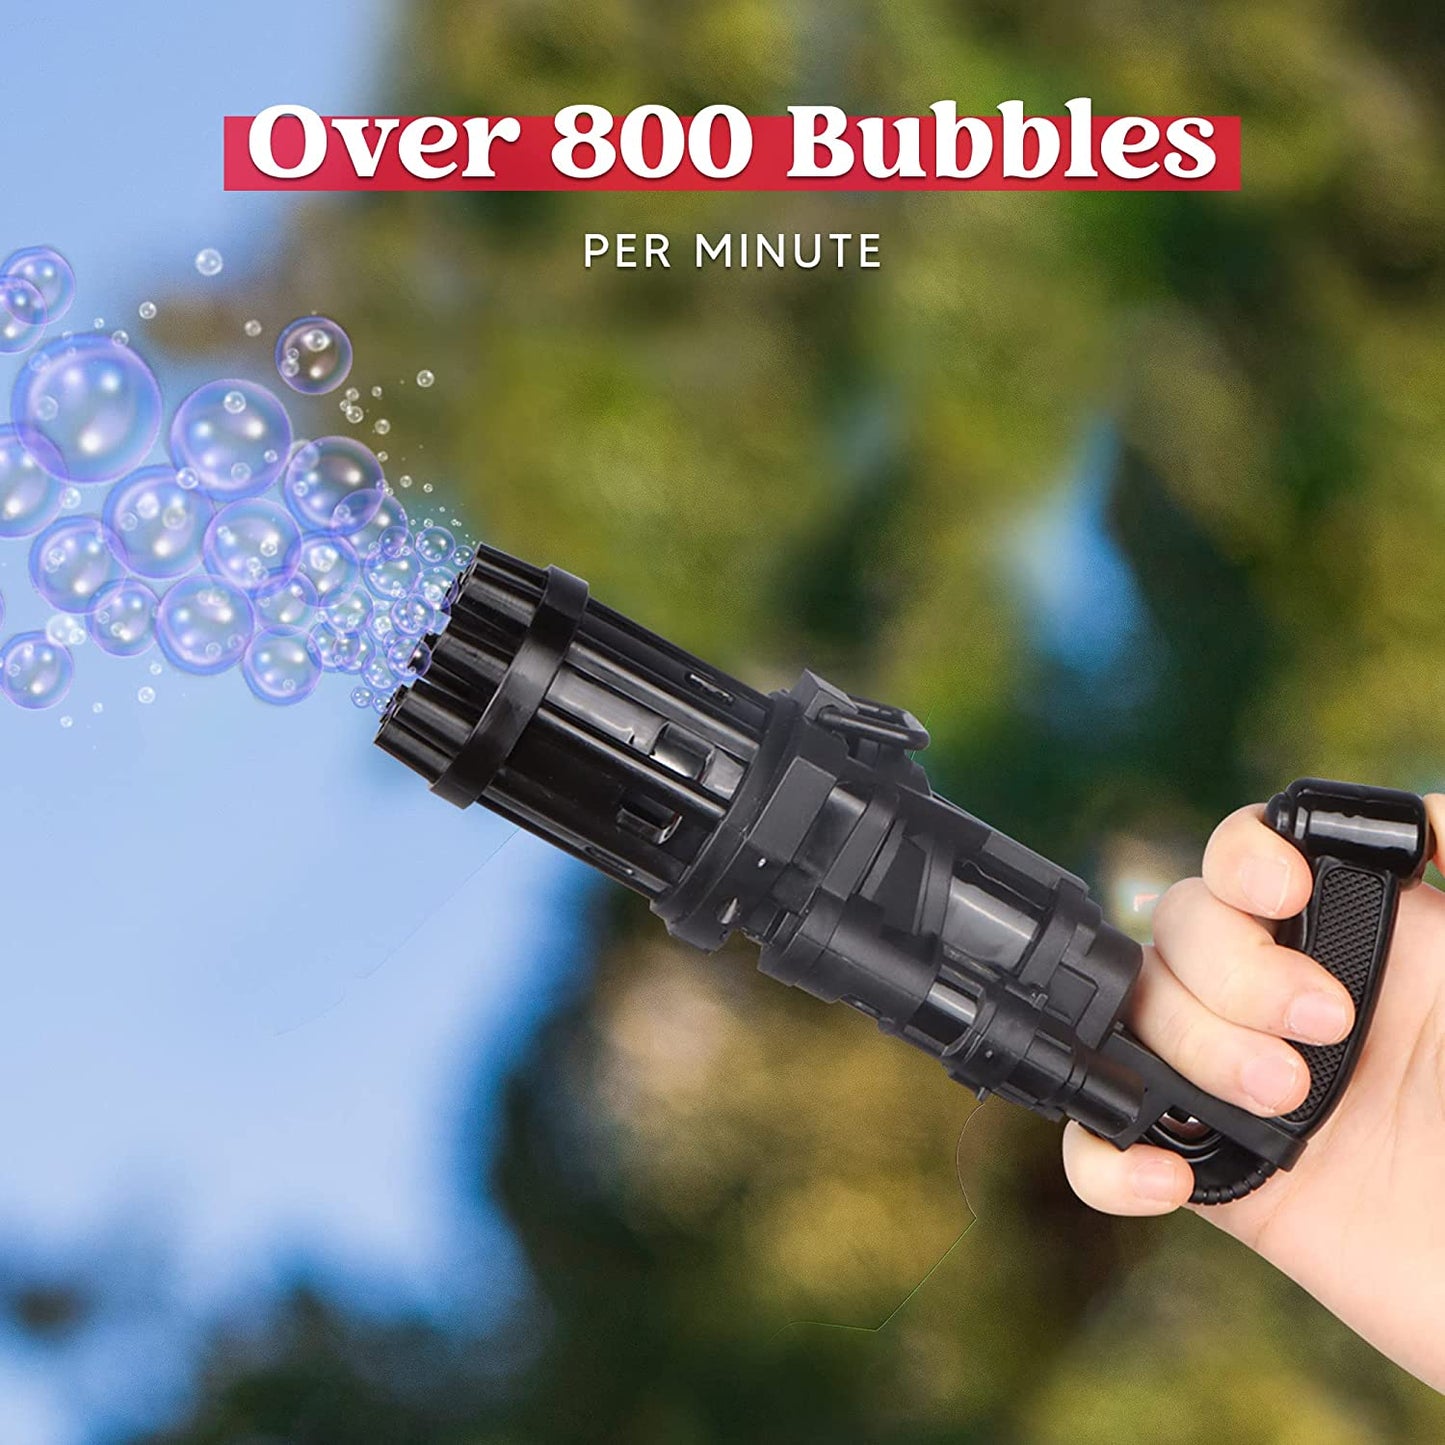 Bubble Maker with Bubble Solutions, Electric Bubble Machine Blower Toy for Kids Outdoor, 8-Hole Automatic Bubble Maker, Summer Gifts for Boys and Girls (Black)